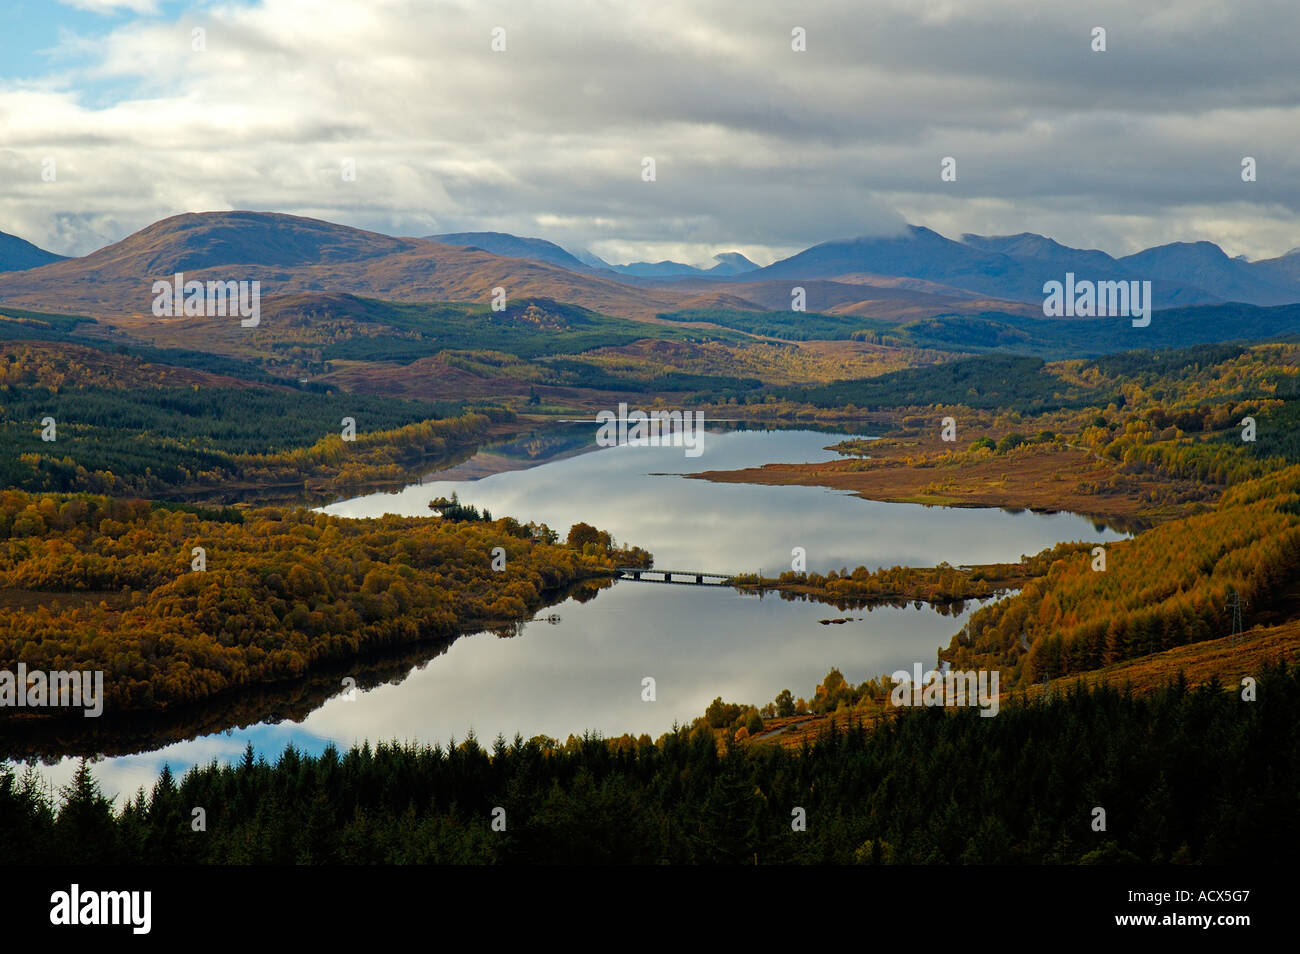 Loch Garry from the viewpoint on the A87 road, Invernesshire, Scotland, UK Stock Photo